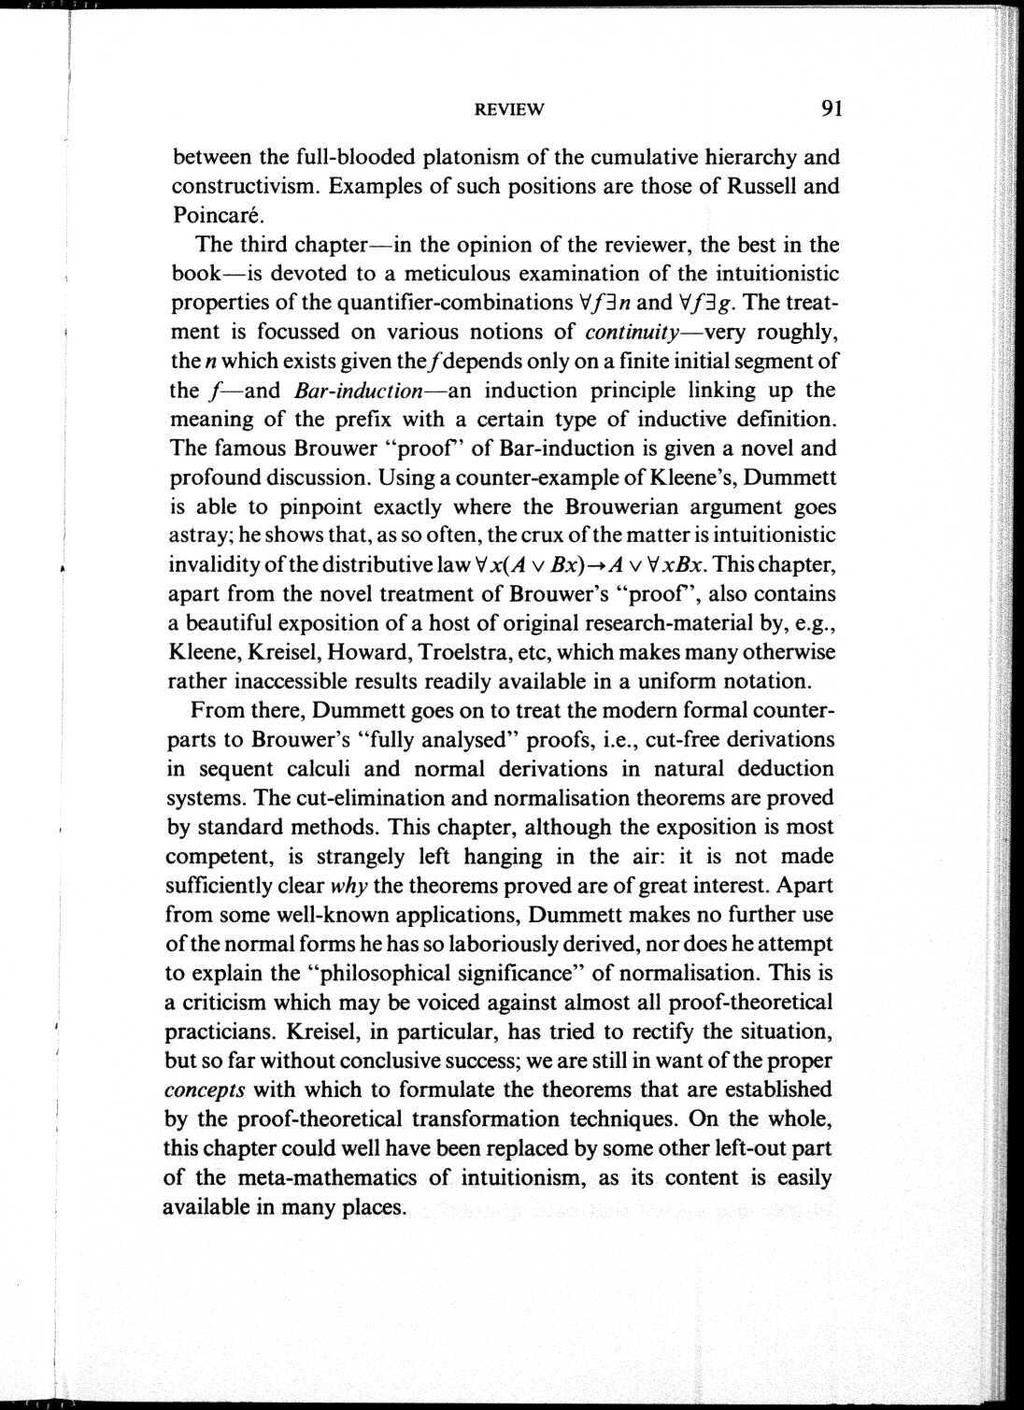 REVIEW 91 between the full-blooded platonism of the cumulative hierarchy and constructivism. Examples of such positions are those of Russell and Poincaré.